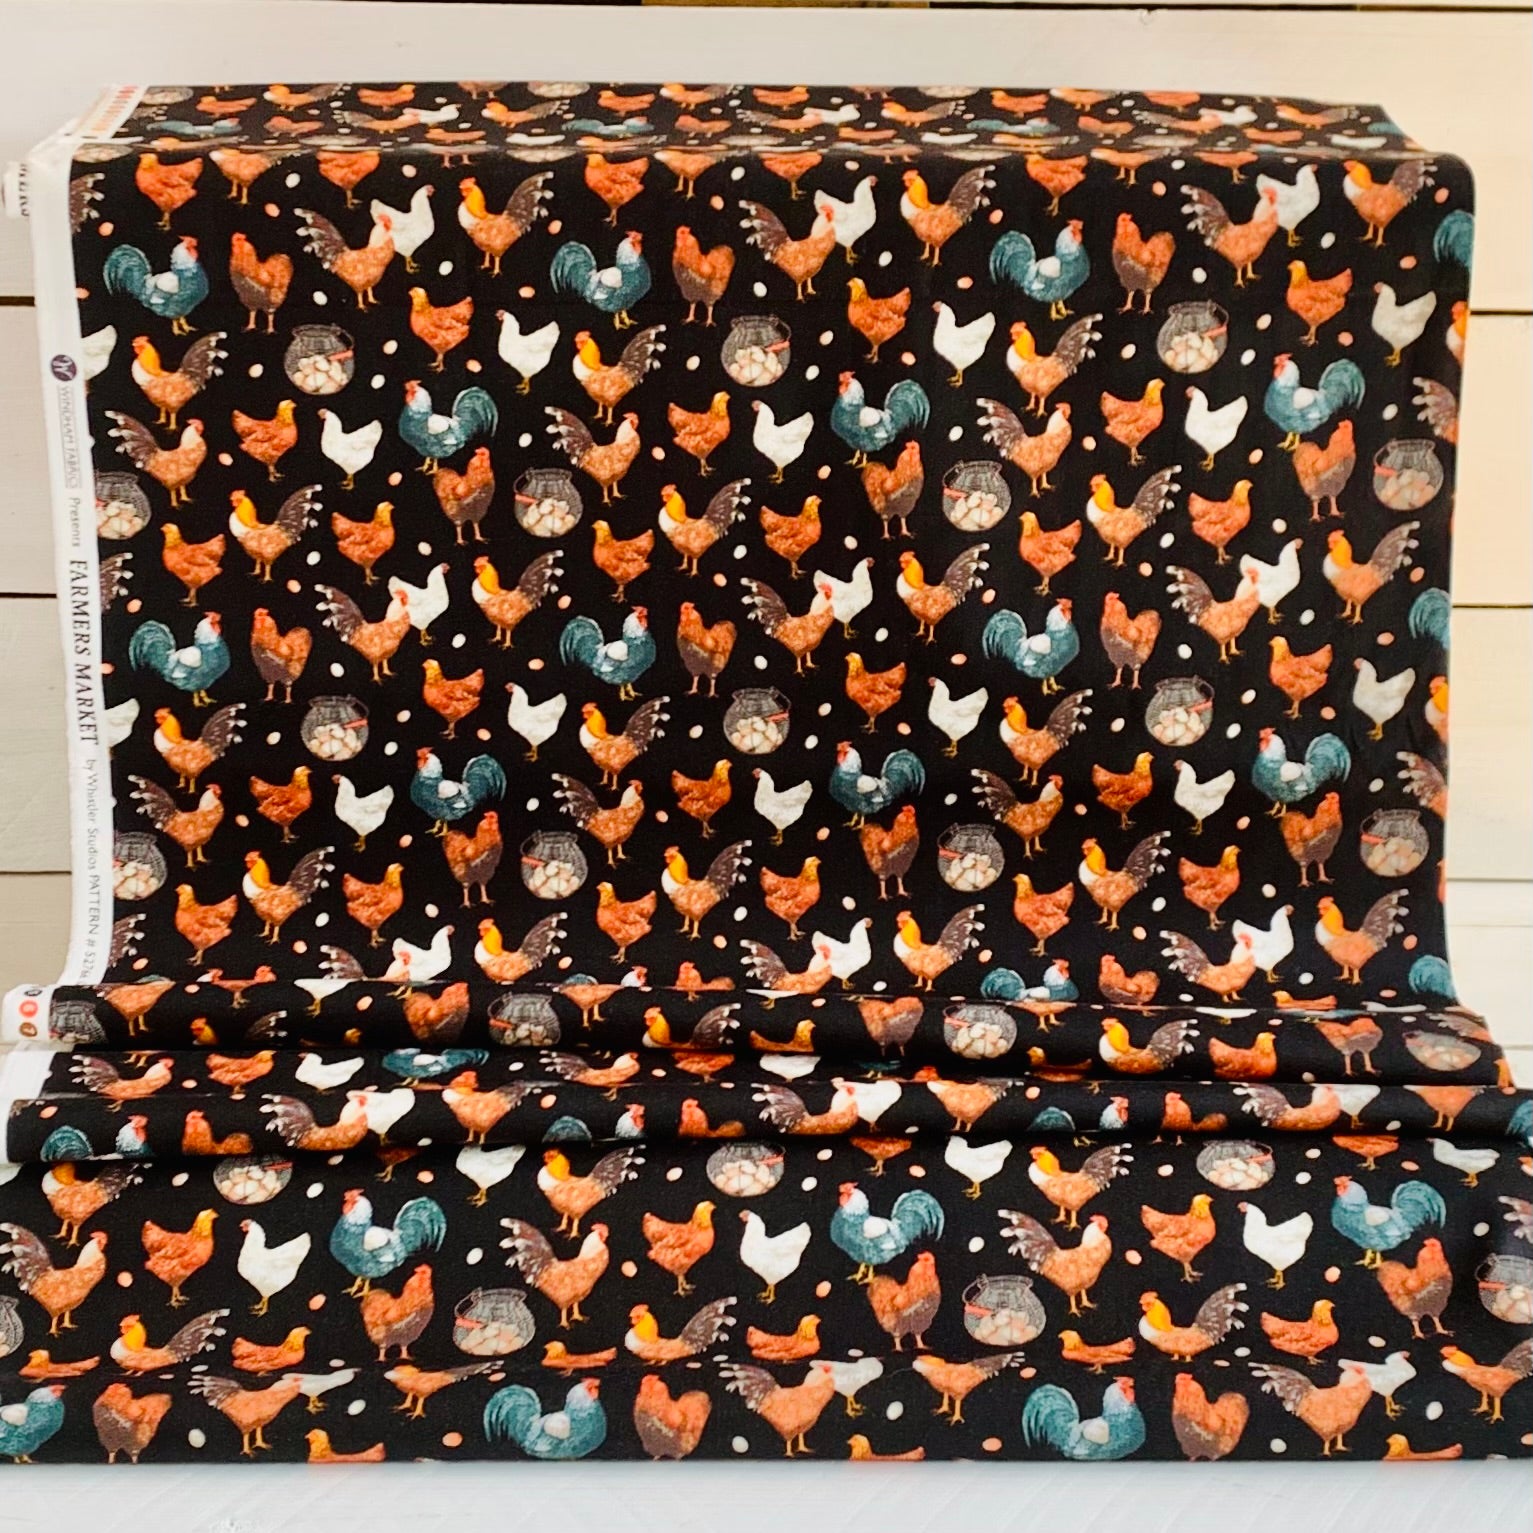 Chickens From Farmers Market Collection by Whistler Studios and Milled by Windham Fabrics- Black 52766-2 Cotton Fabric